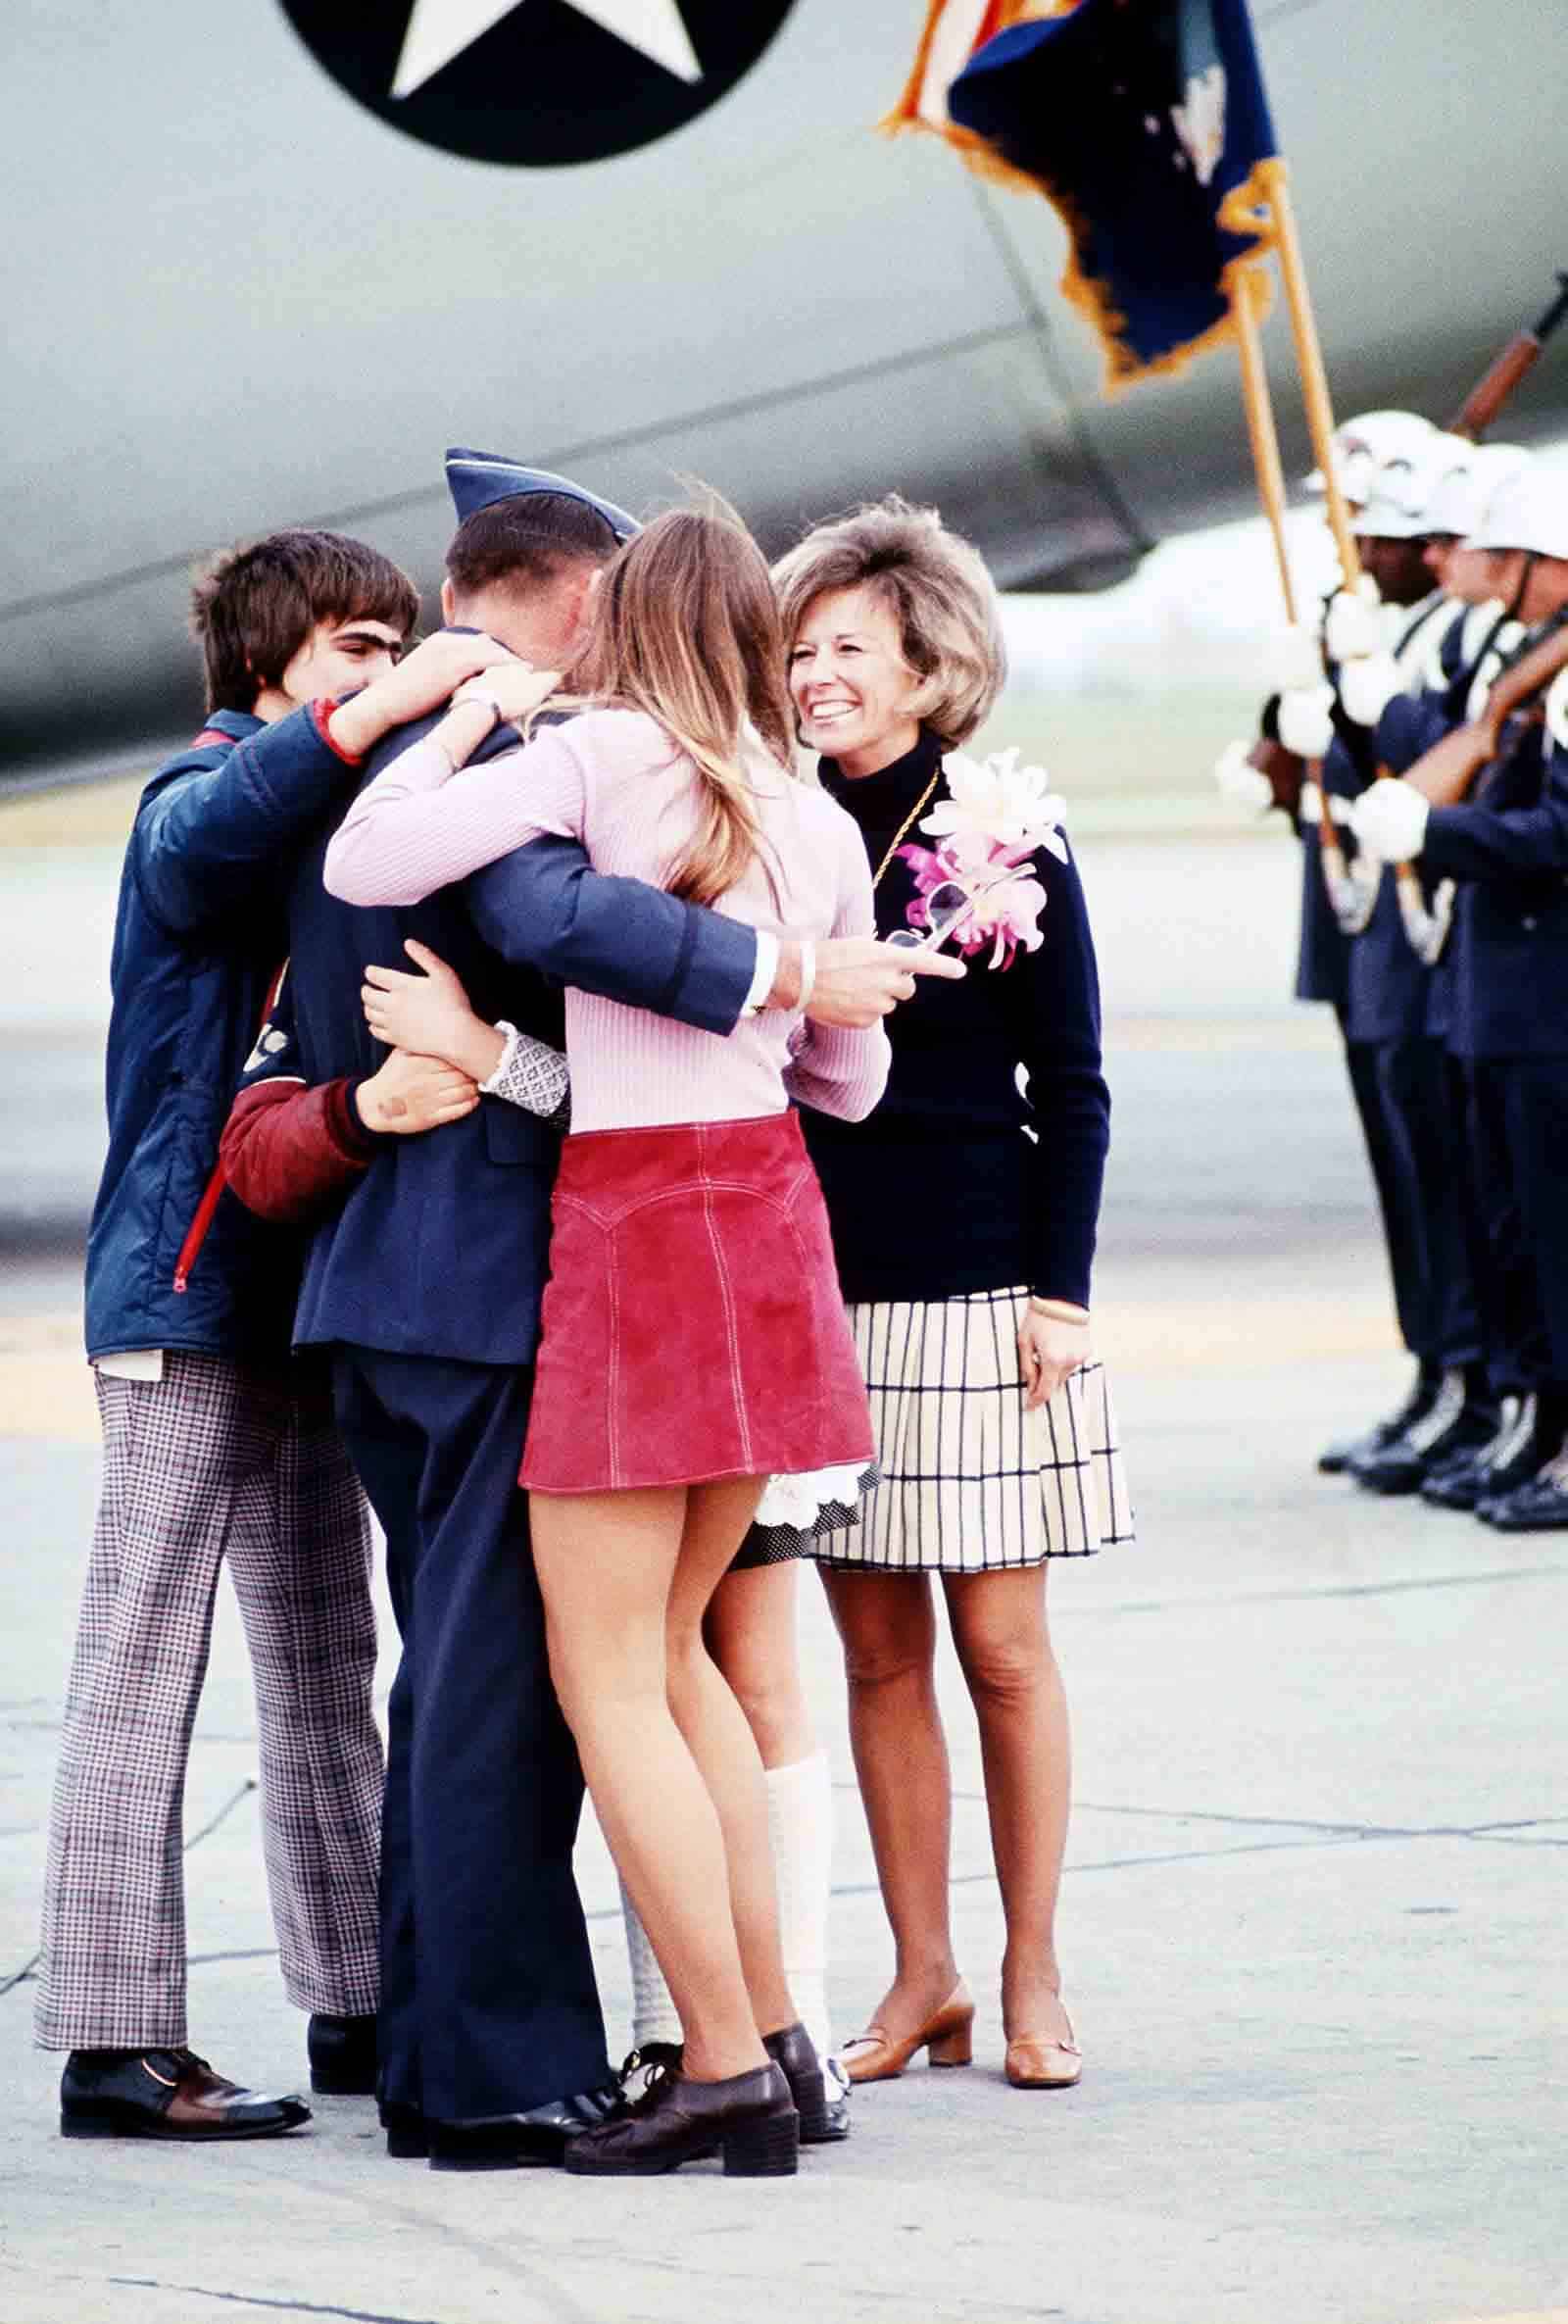 Lt. Col. Robert L. Stirm met his family when he arrived at Travis Air Force Base after being released from prison in Vietnam